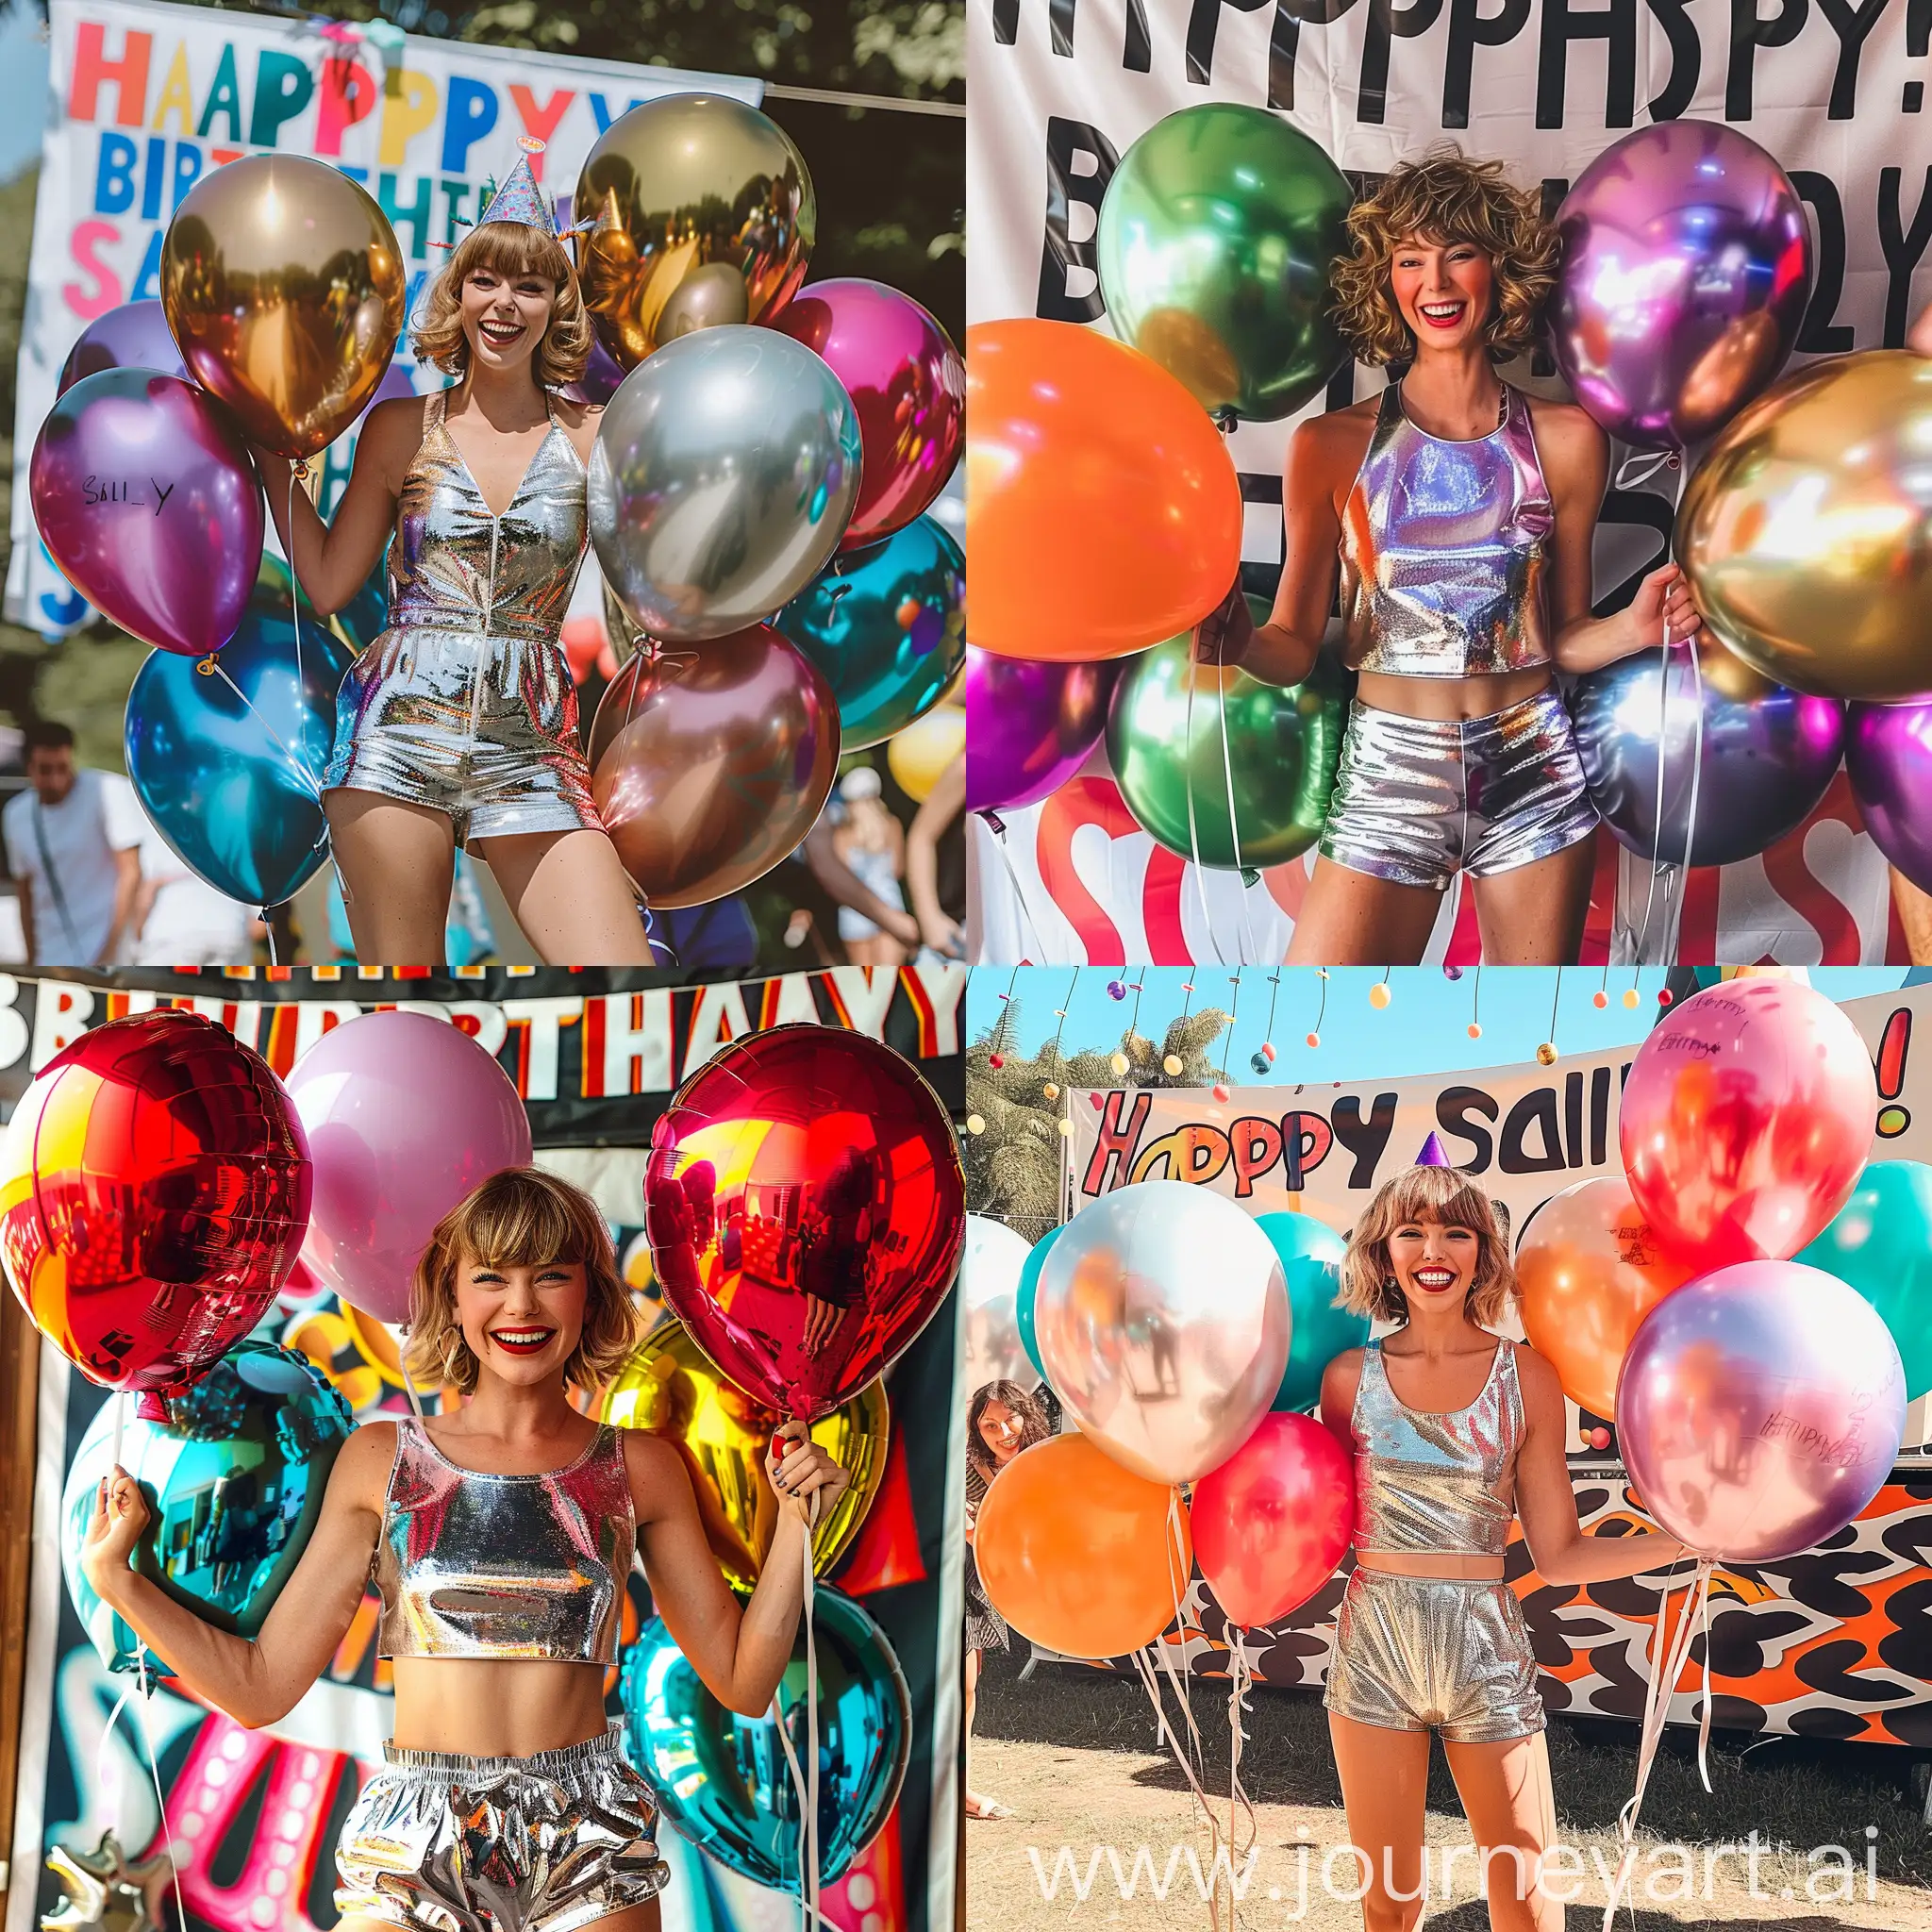 Taylor-Swift-Smiling-with-Colorful-Balloons-and-Happy-Birthday-Sally-Banner